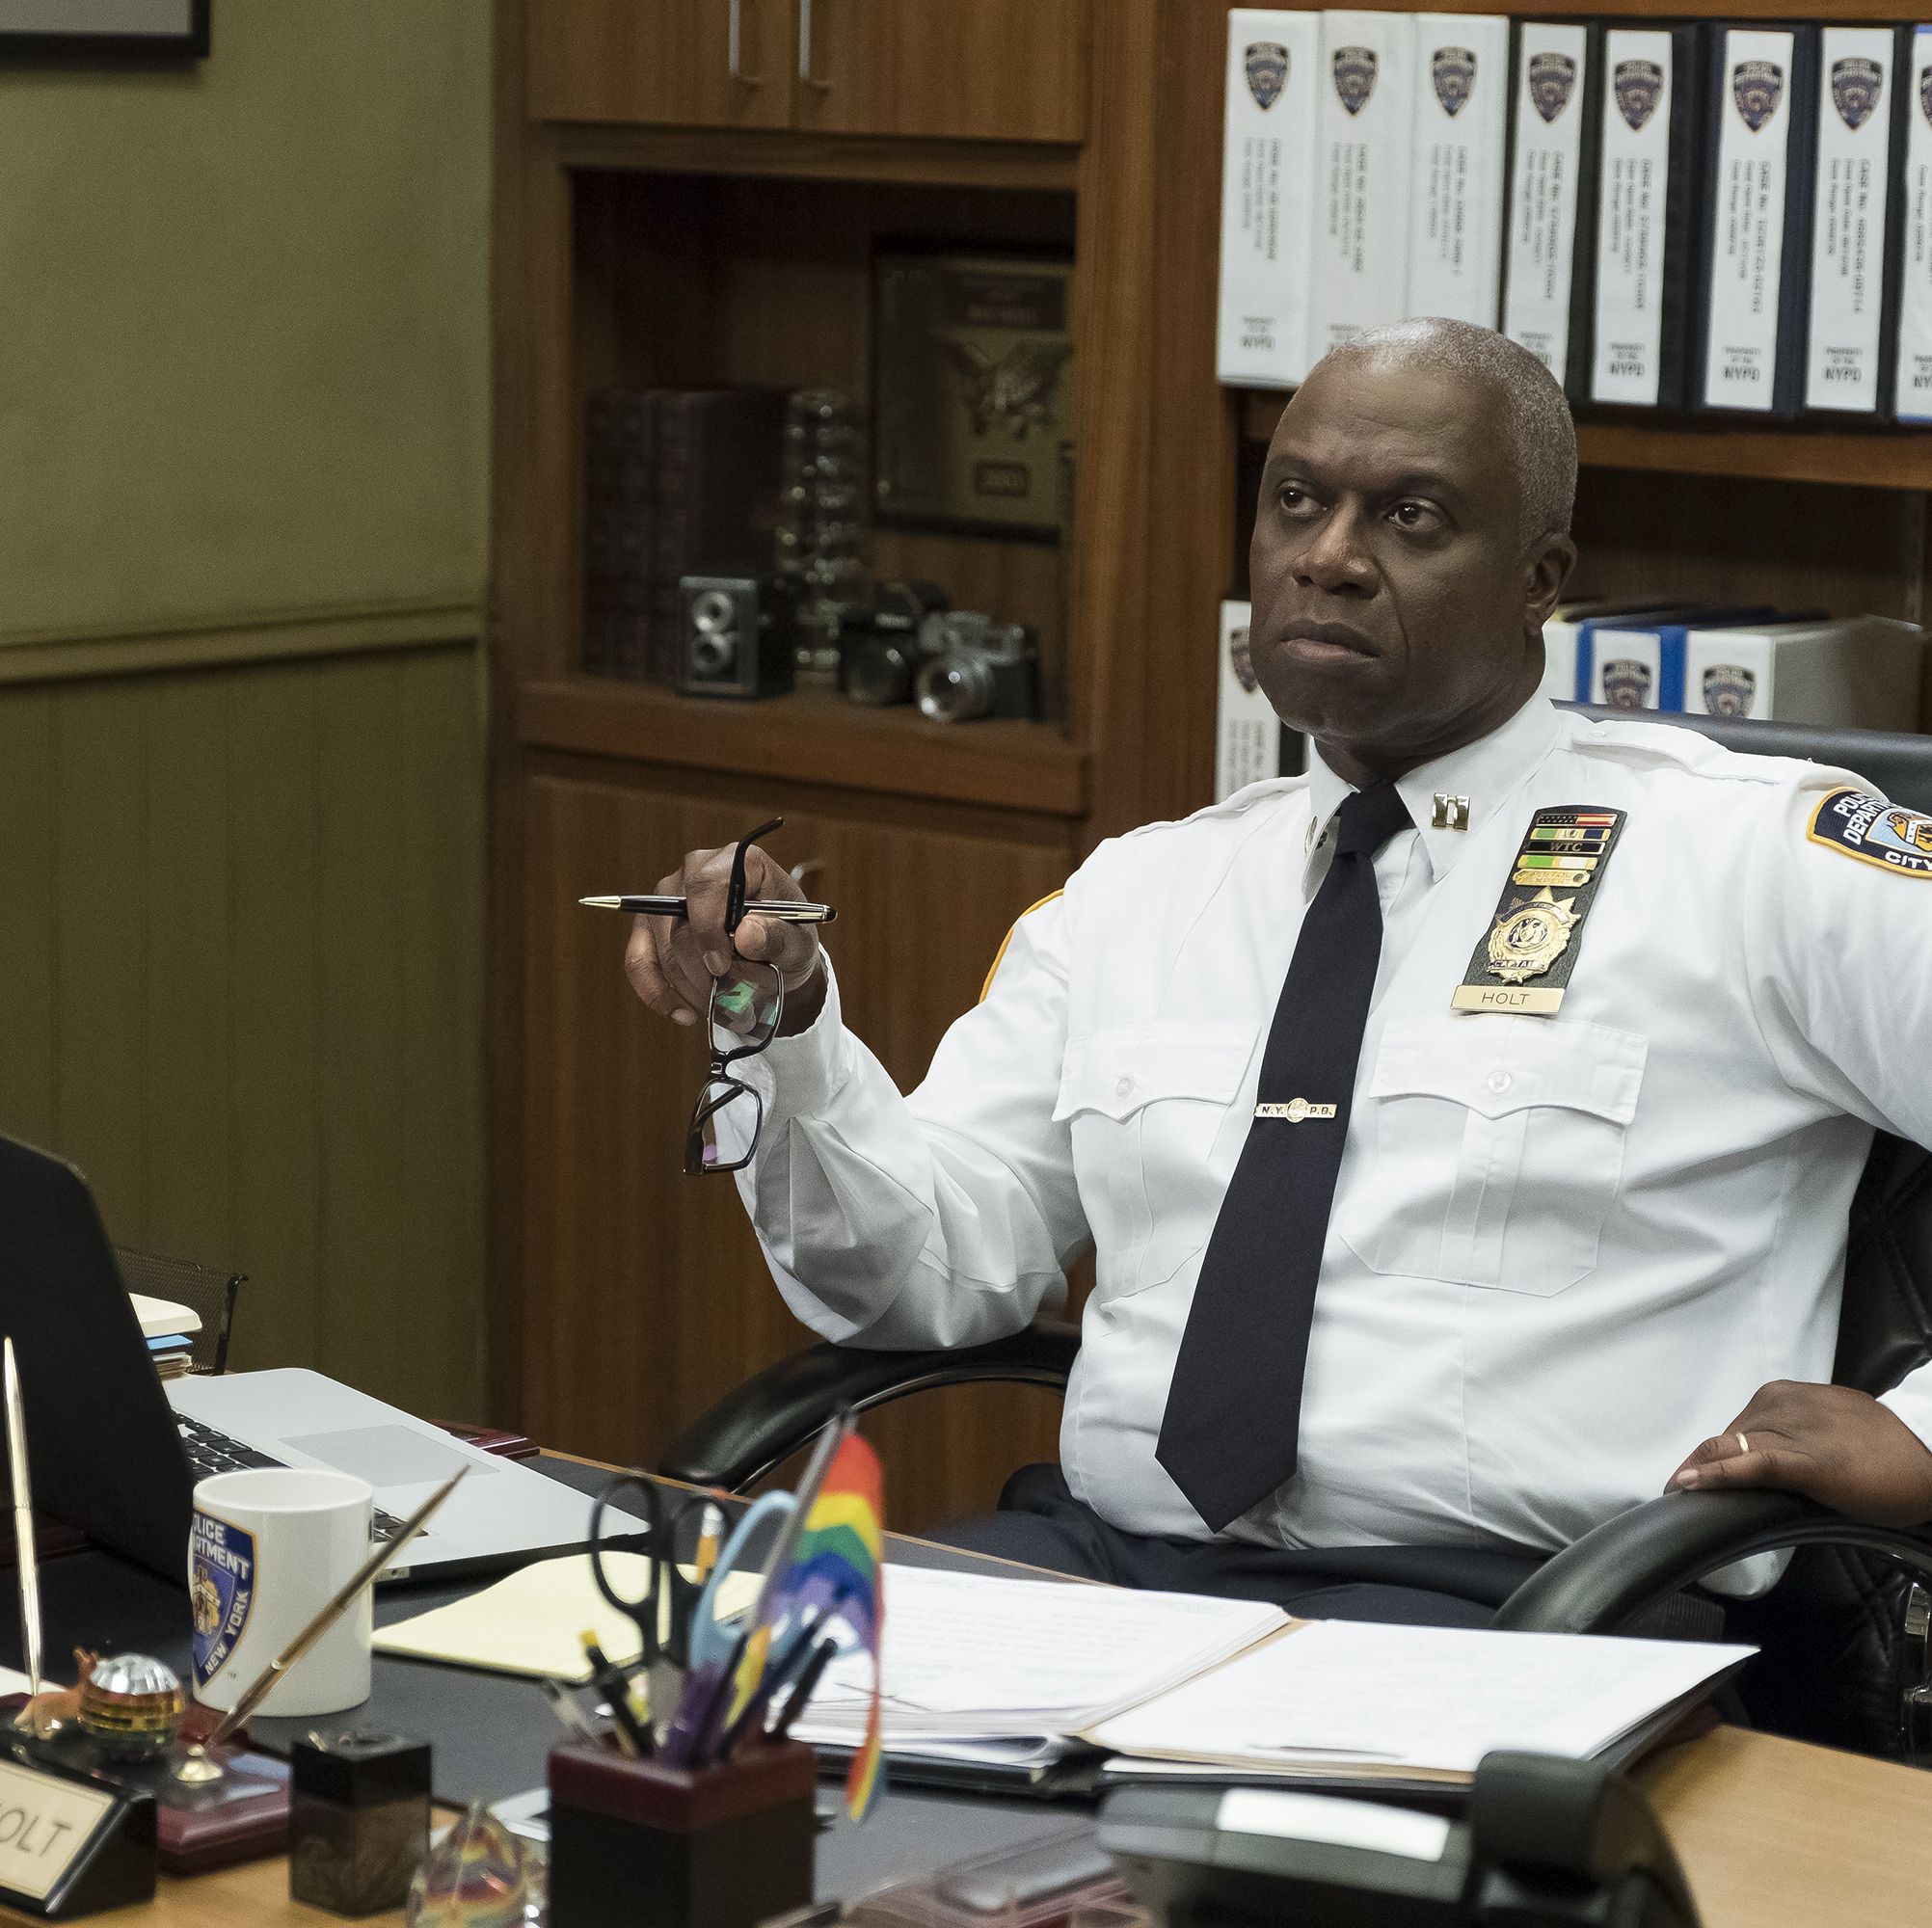 Andre Braugher Was One of the Greatest Actors Of His Generation